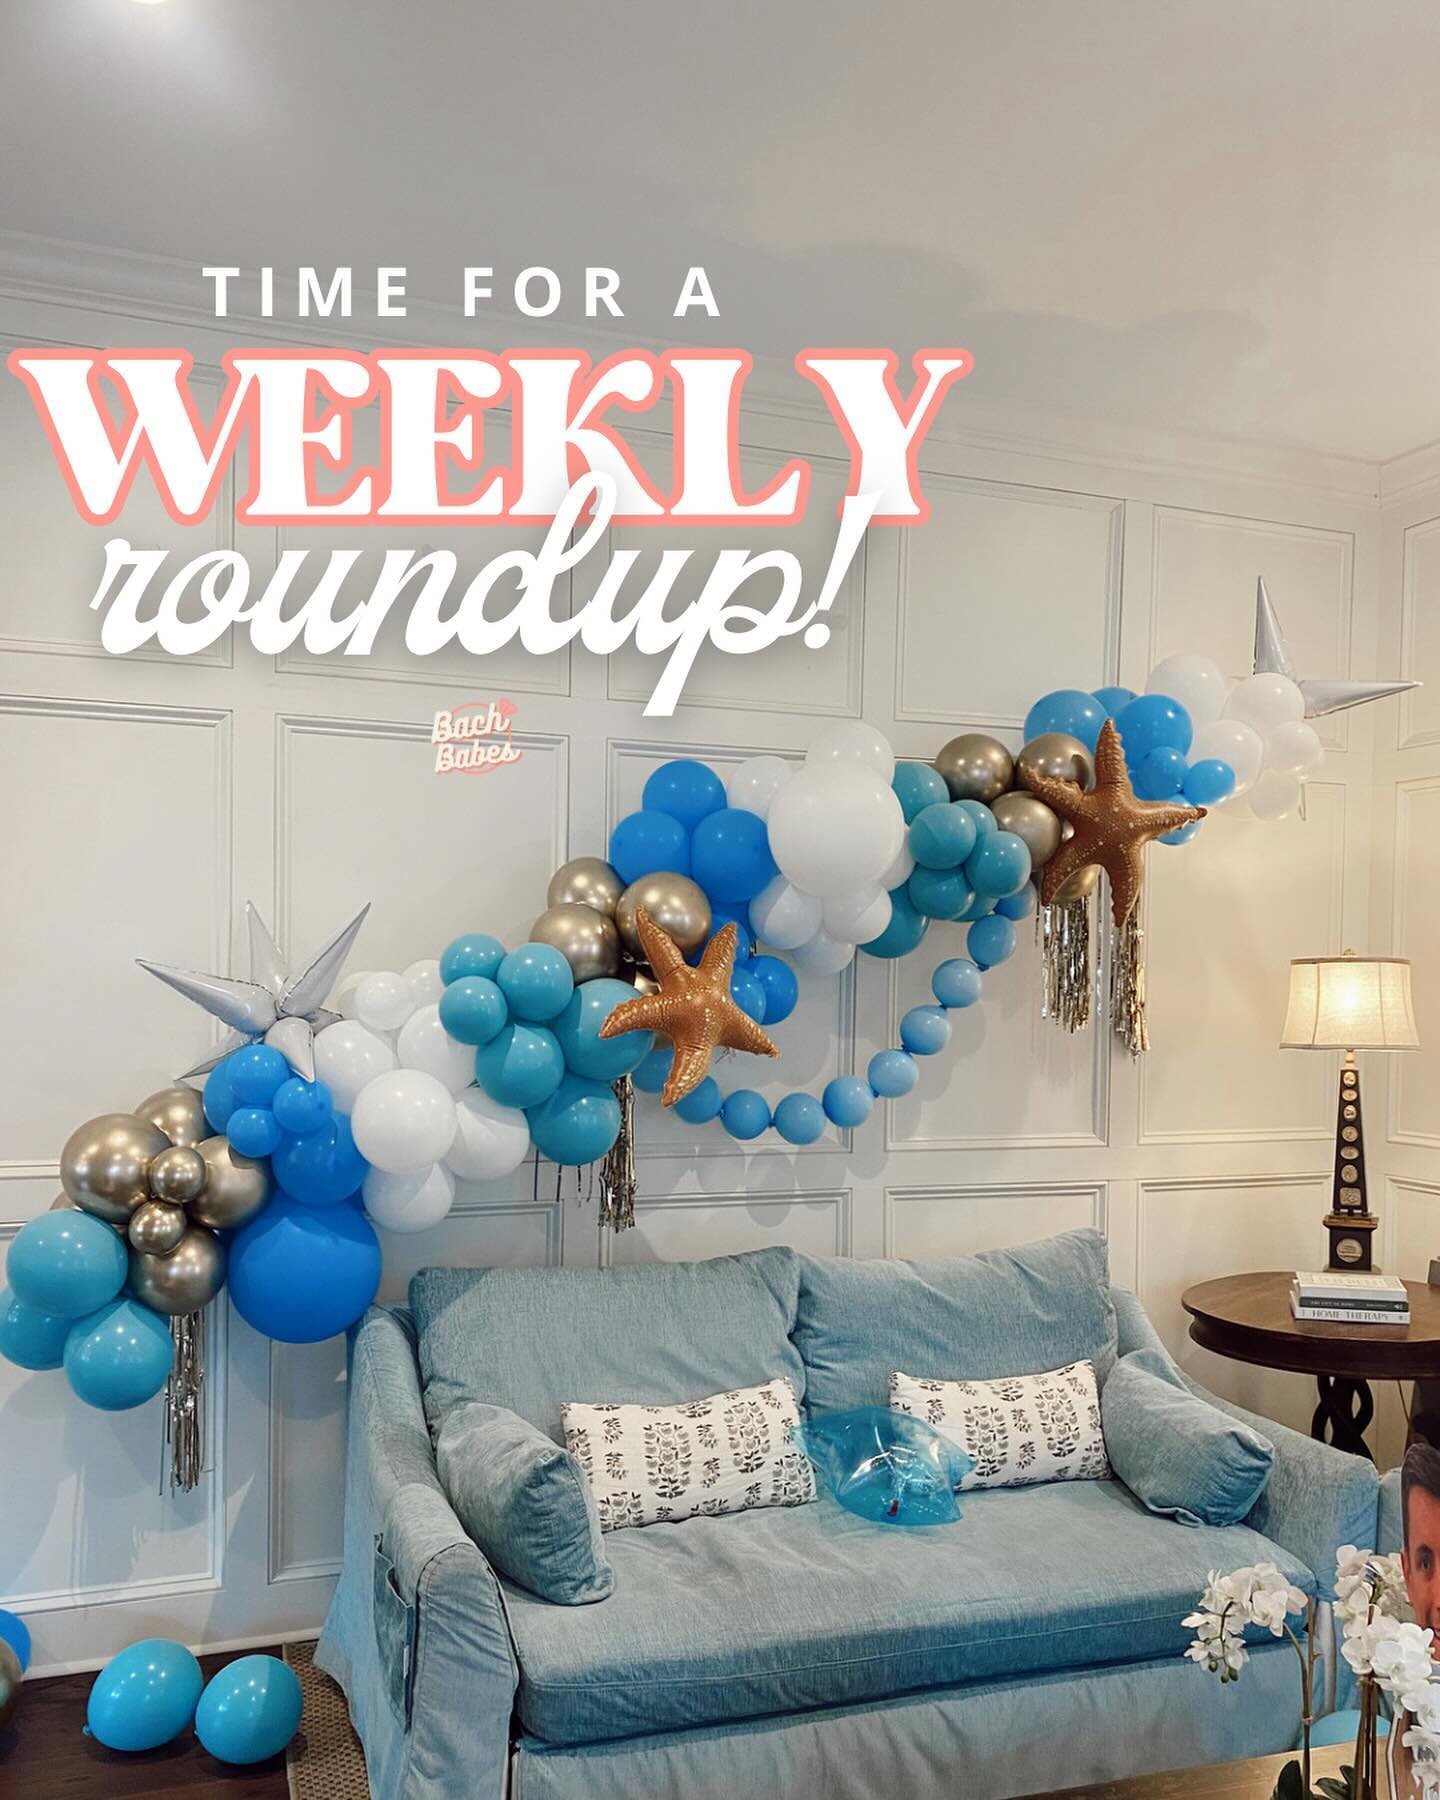 What 👏 a 👏 WEEK! From Austin to Nashville to Charleston, we&rsquo;re your go-to gals for all things decor! 🎈

Now let&rsquo;s book your besties party! 🤩